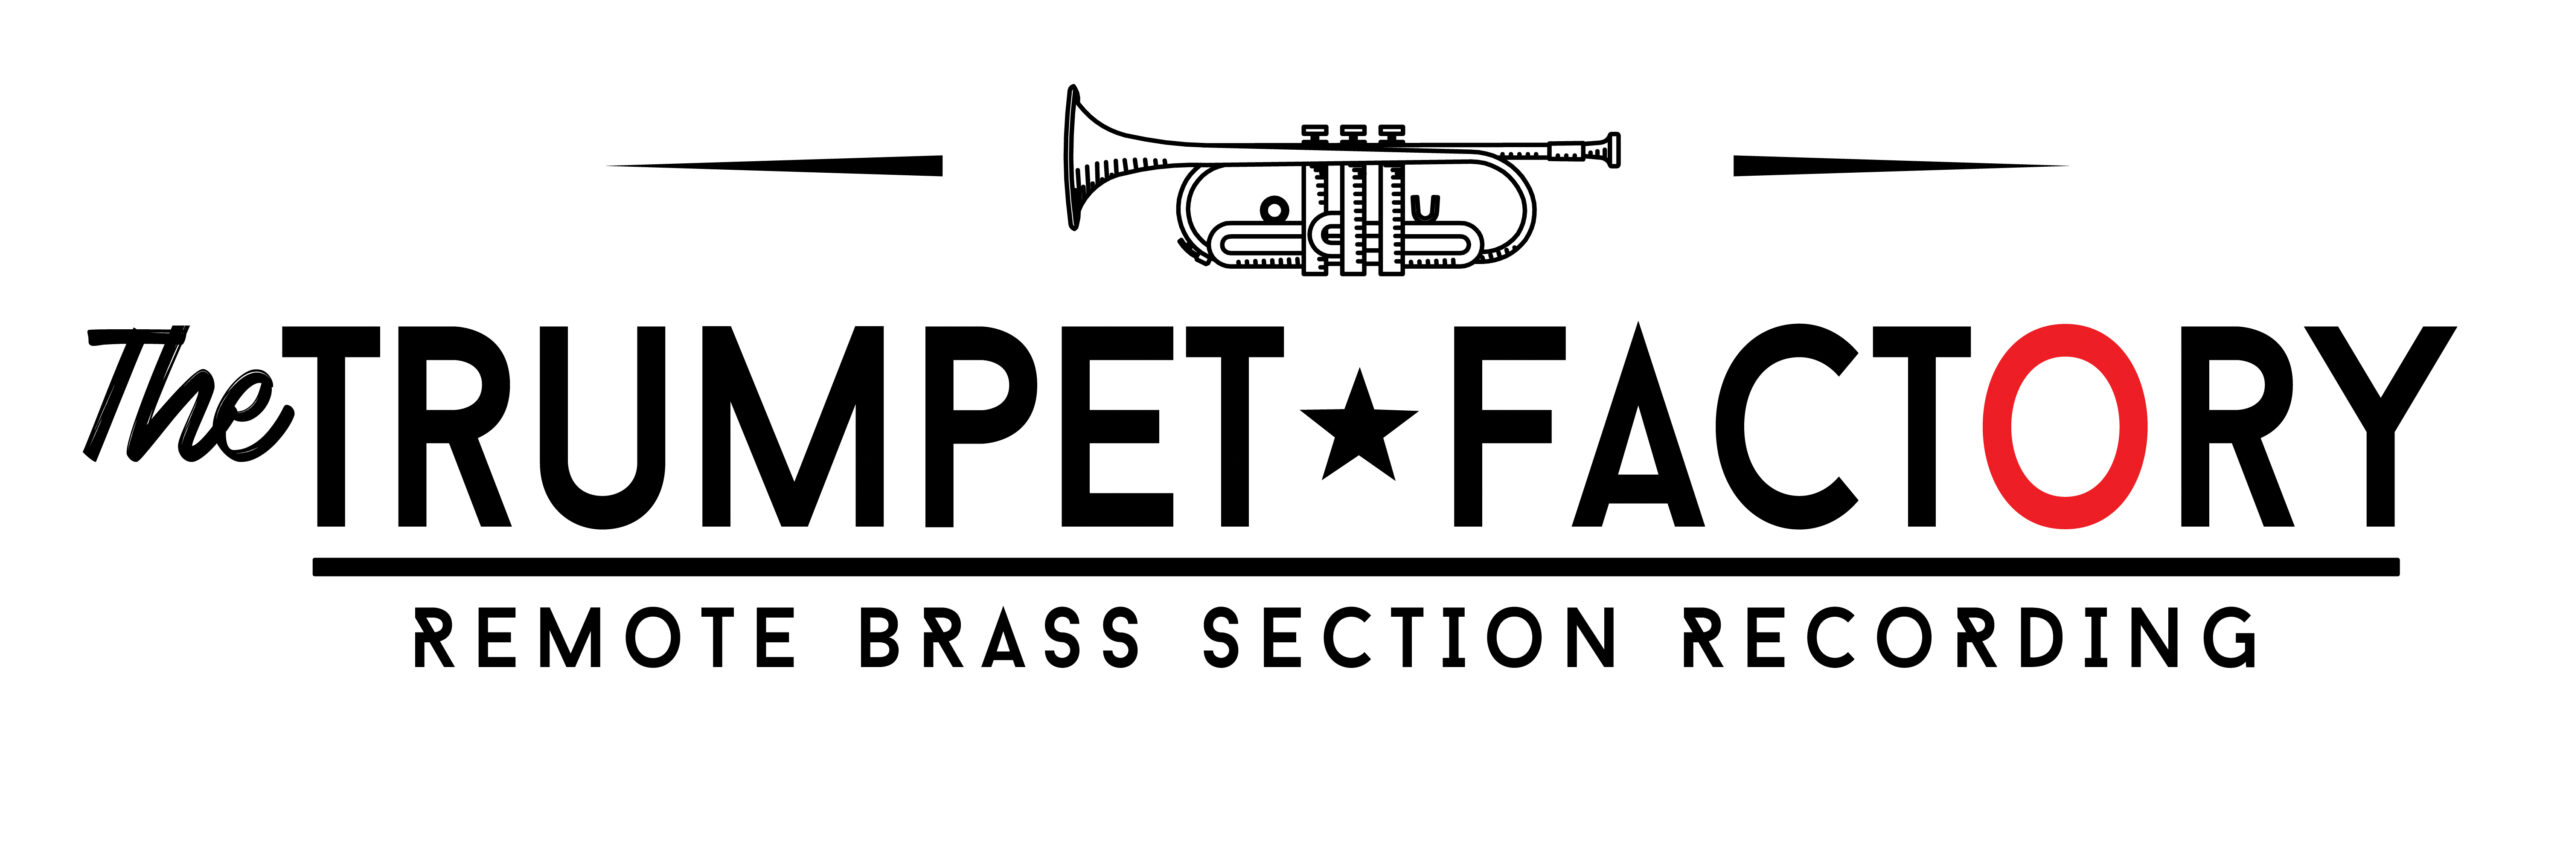 The Trumpet Factory